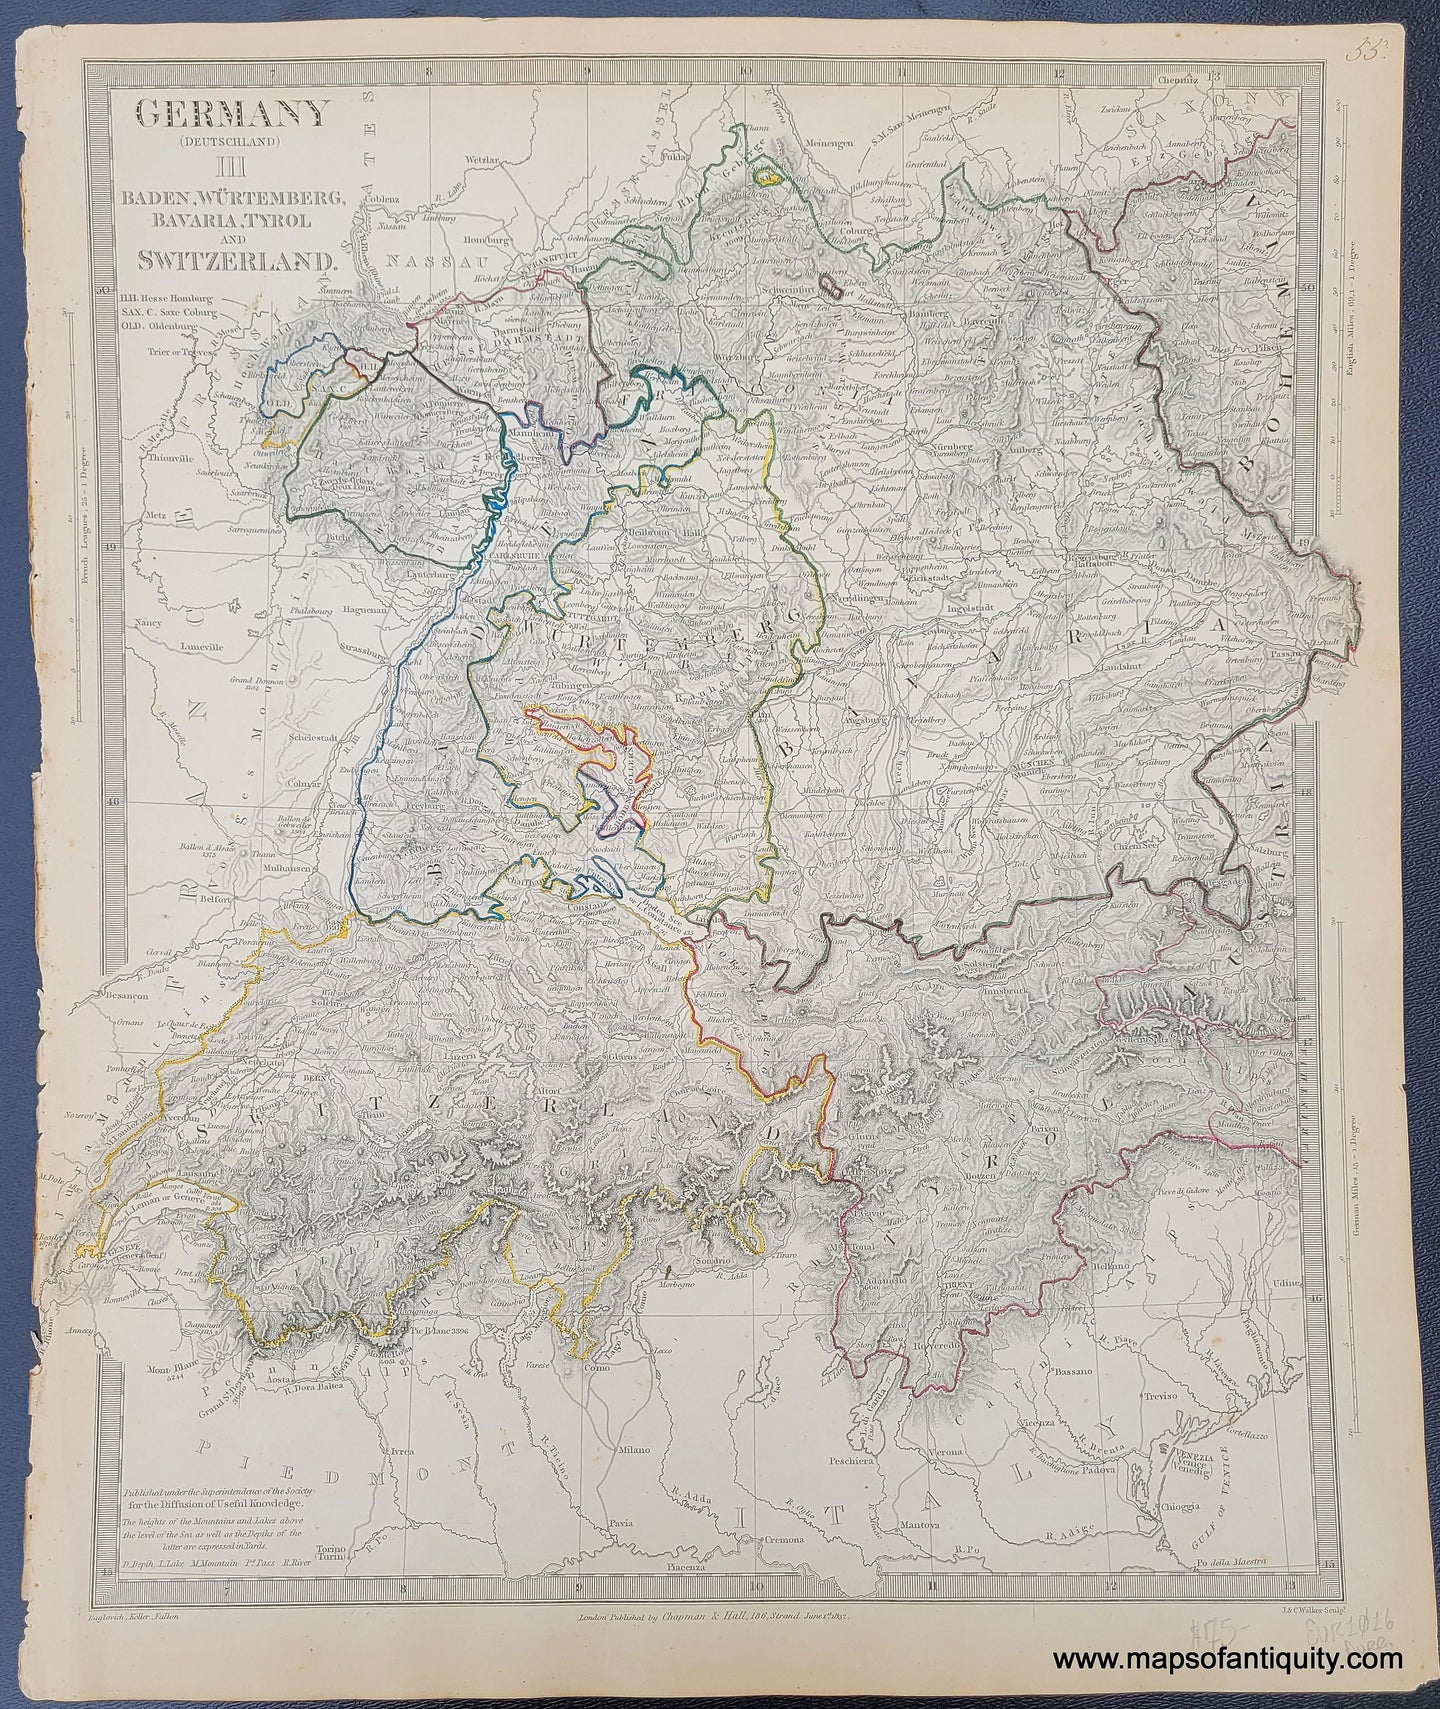 Antique-Map-Germany-III-Baden-Wurtemberg-Bavaria-Tyrol-and-Switzerland-1832-SDUK-Sociaty-for-the-Diffusion-of-Useful-Knowledge-1830s-1800s-19th-century-Maps-of-Antiquity